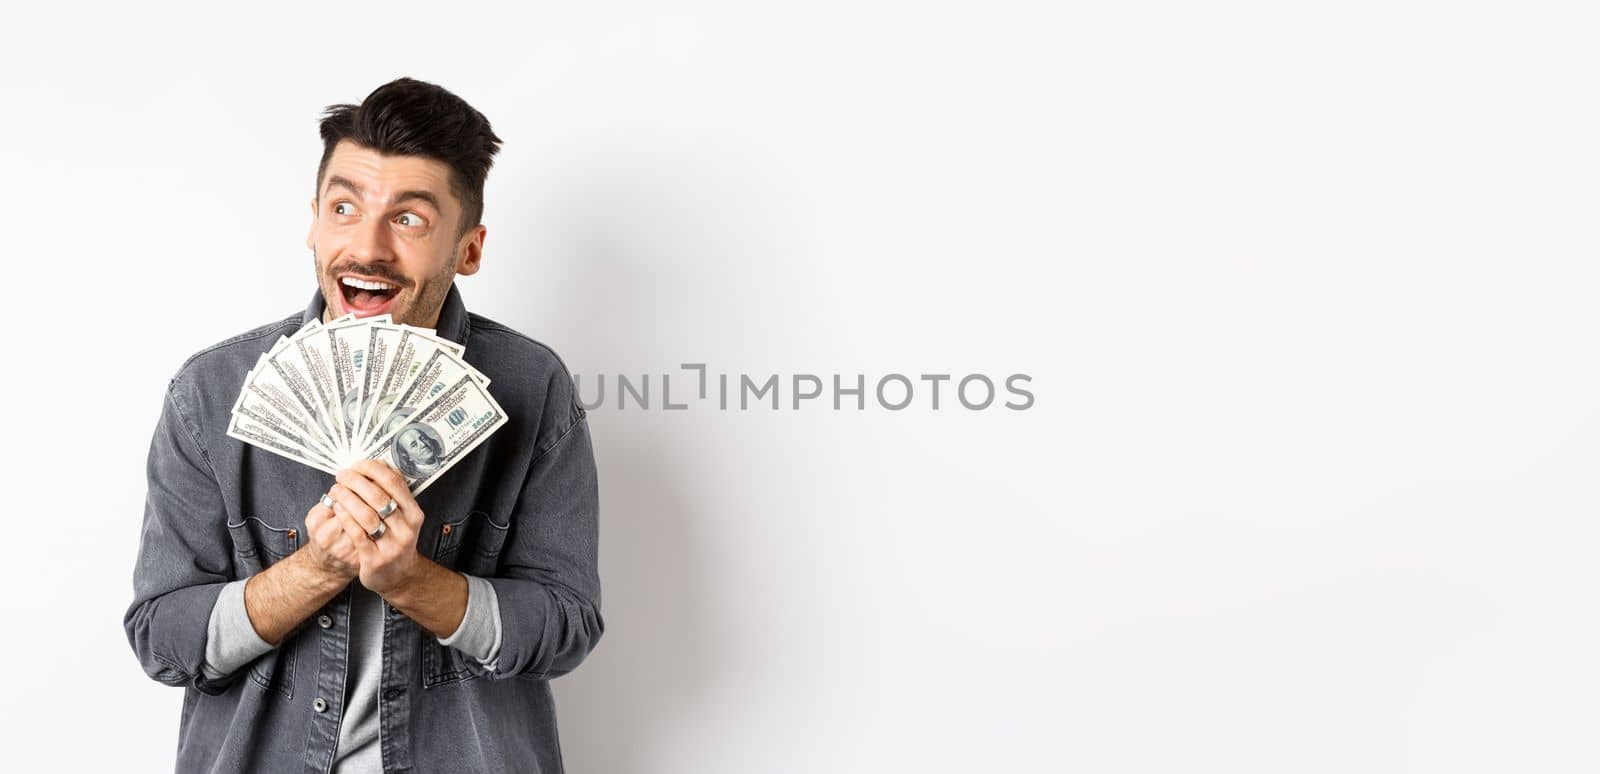 Rich happy man dreaming of shopping wish dollar bills in hands, looking aside pensive and holding money, standing against white background.